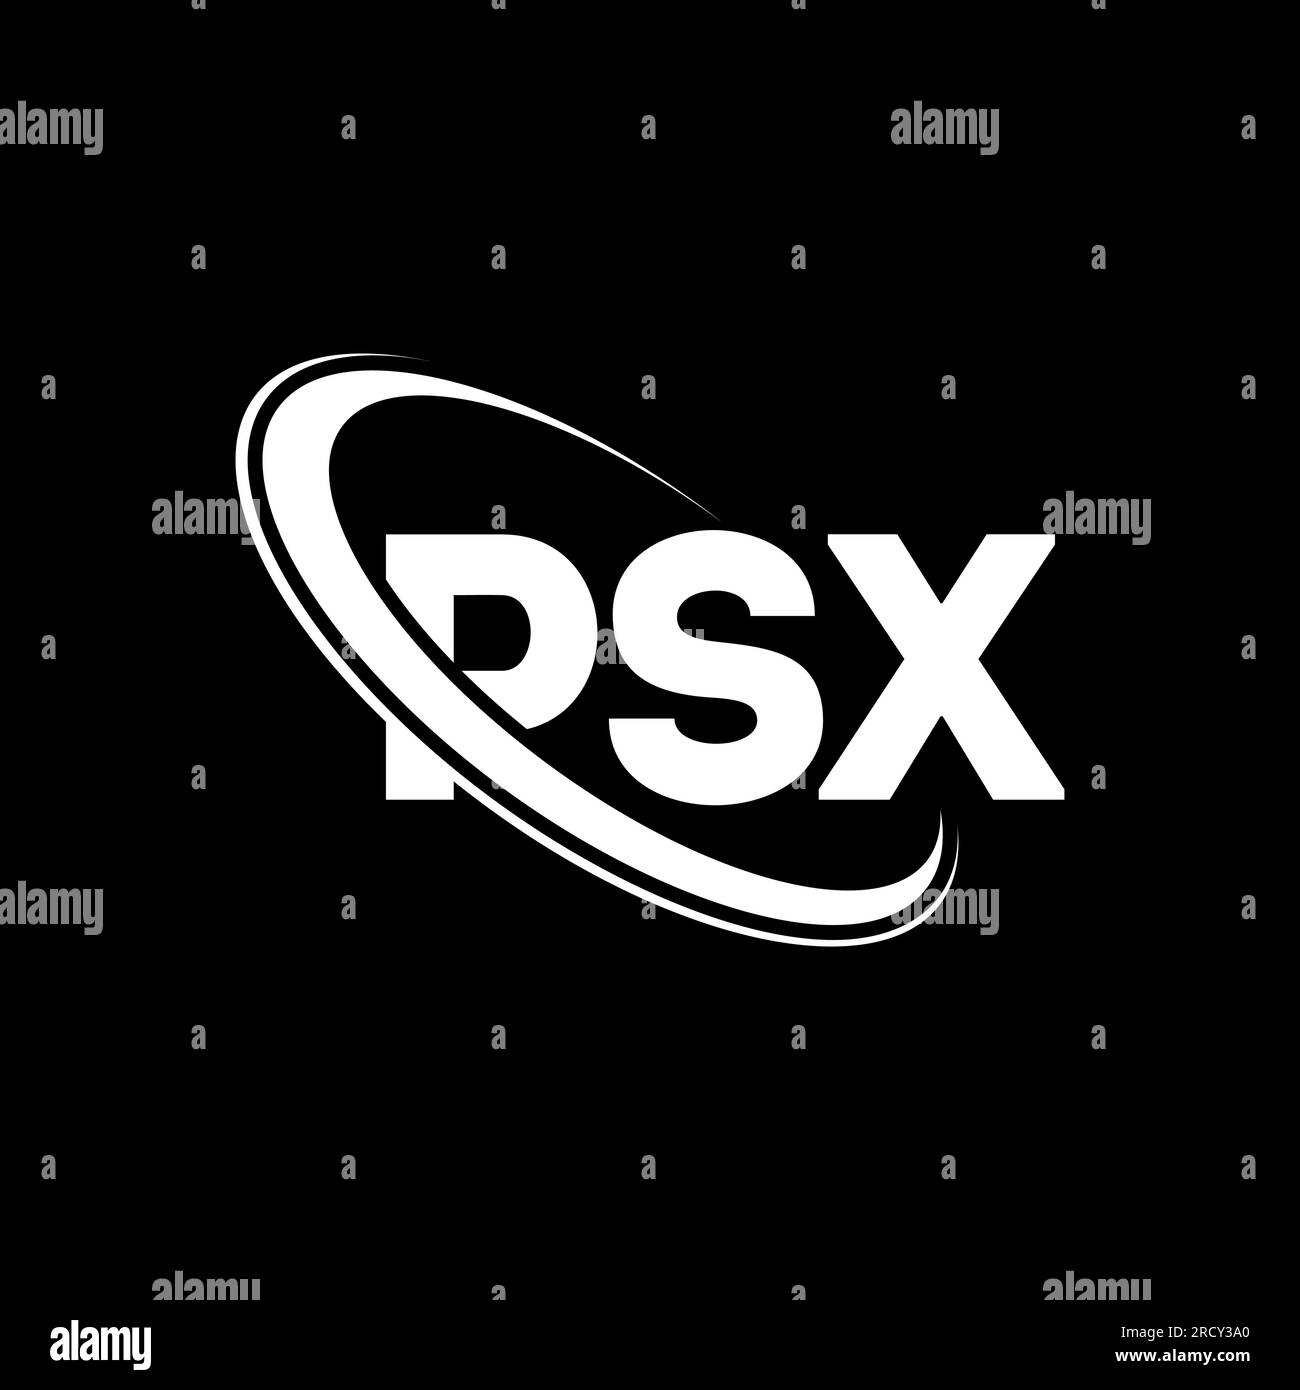 PSX logo. PSX letter. PSX letter logo design. Initials PSX logo linked with circle and uppercase monogram logo. PSX typography for technology, busines Stock Vector